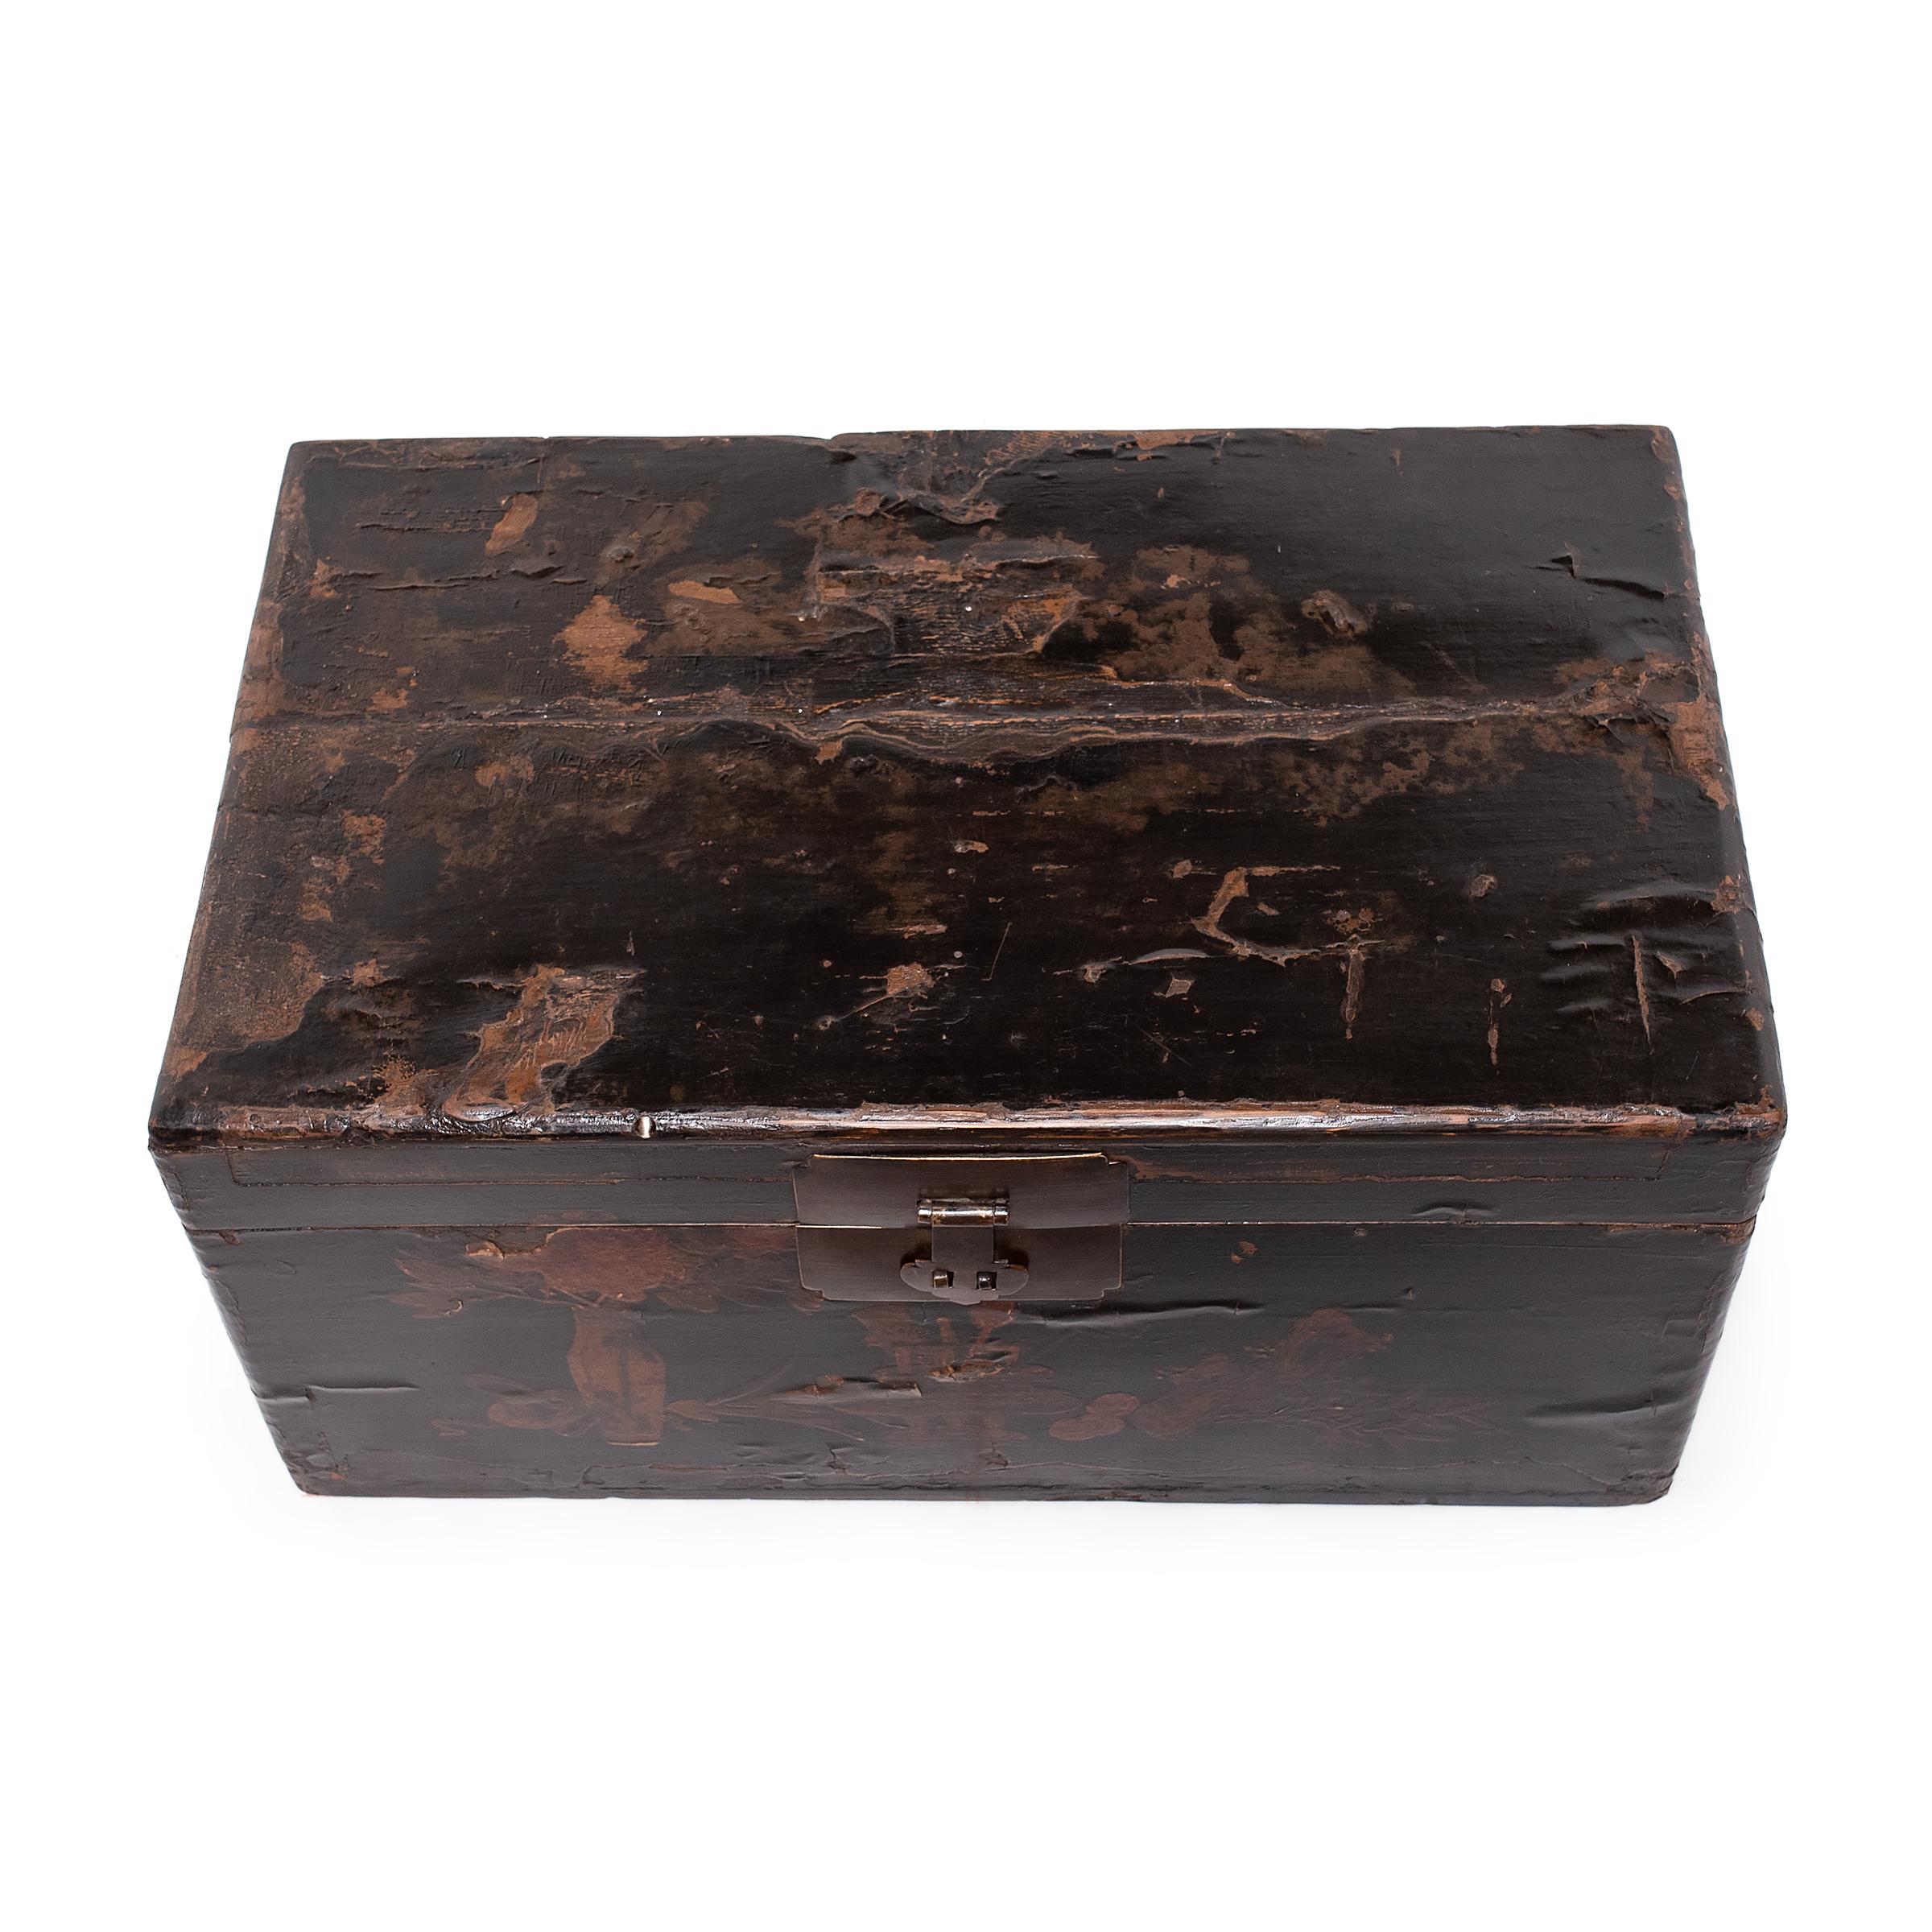 Lacquered Chinese Scholar's Studio Trunk, c. 1900